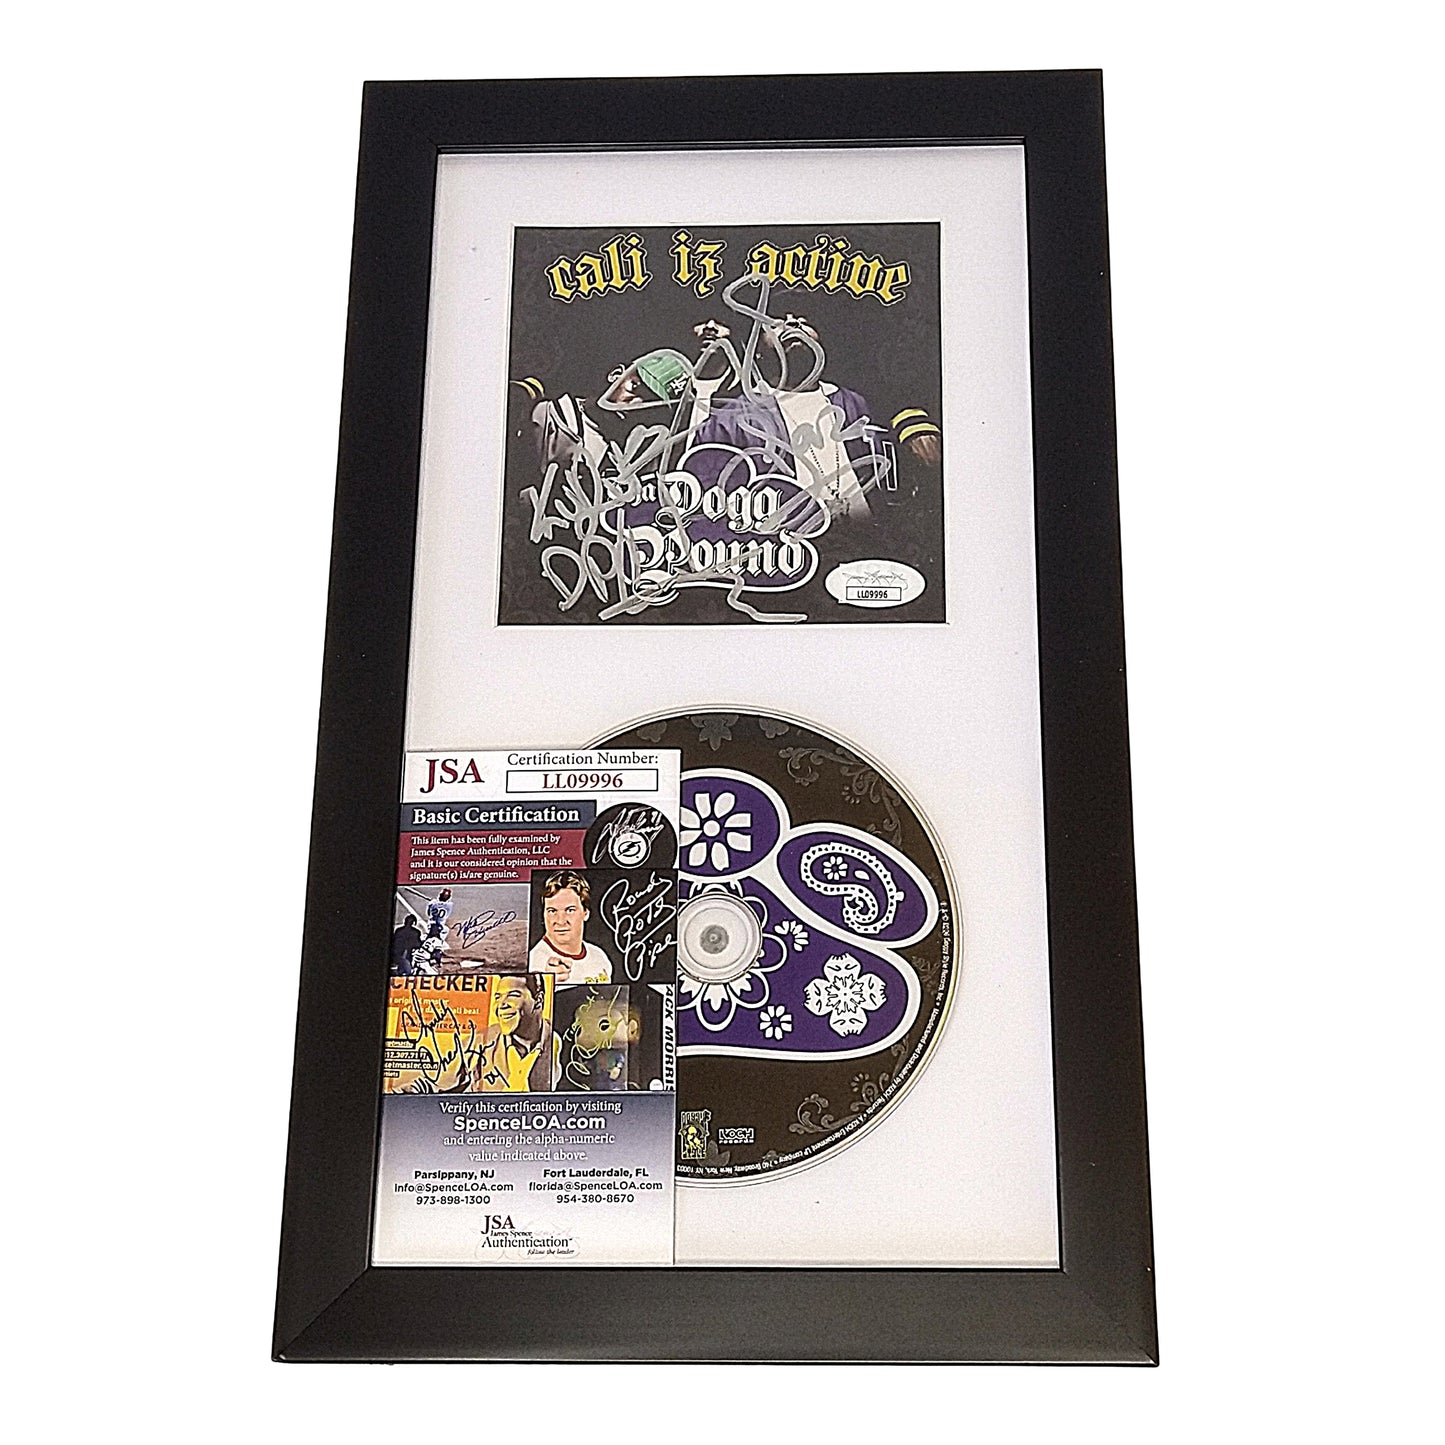 Music- Autographed- Snoop Dogg, Kurupt and Daz Dillinger Signed Dogg Pound DPG Cali Iz Active Framed Compact Disc Cover Booklet with Disc- JSA Authentication- 103